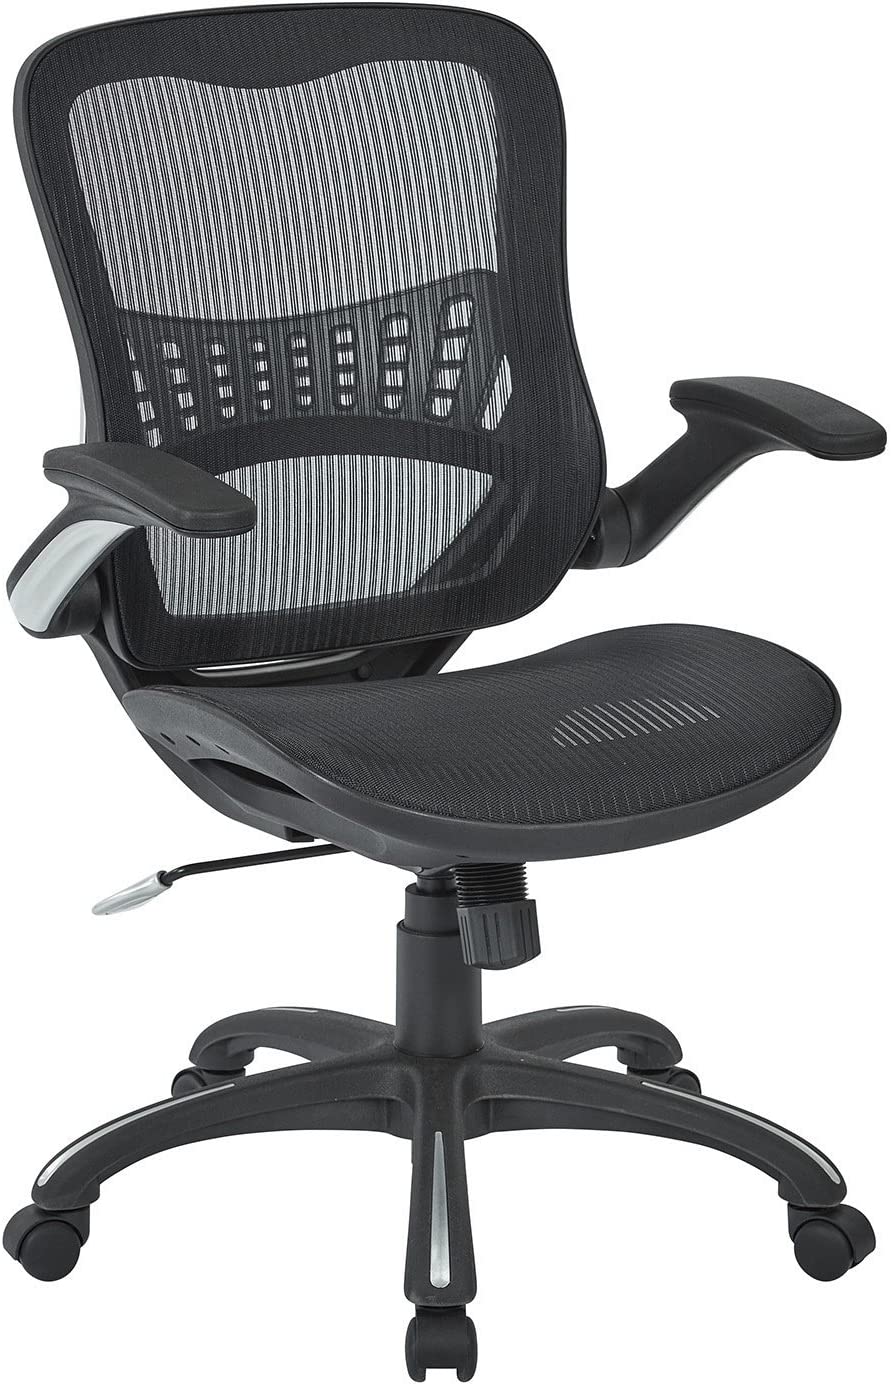 Office Chairs For Lower Back Pain: 5 Things You Must Consider 